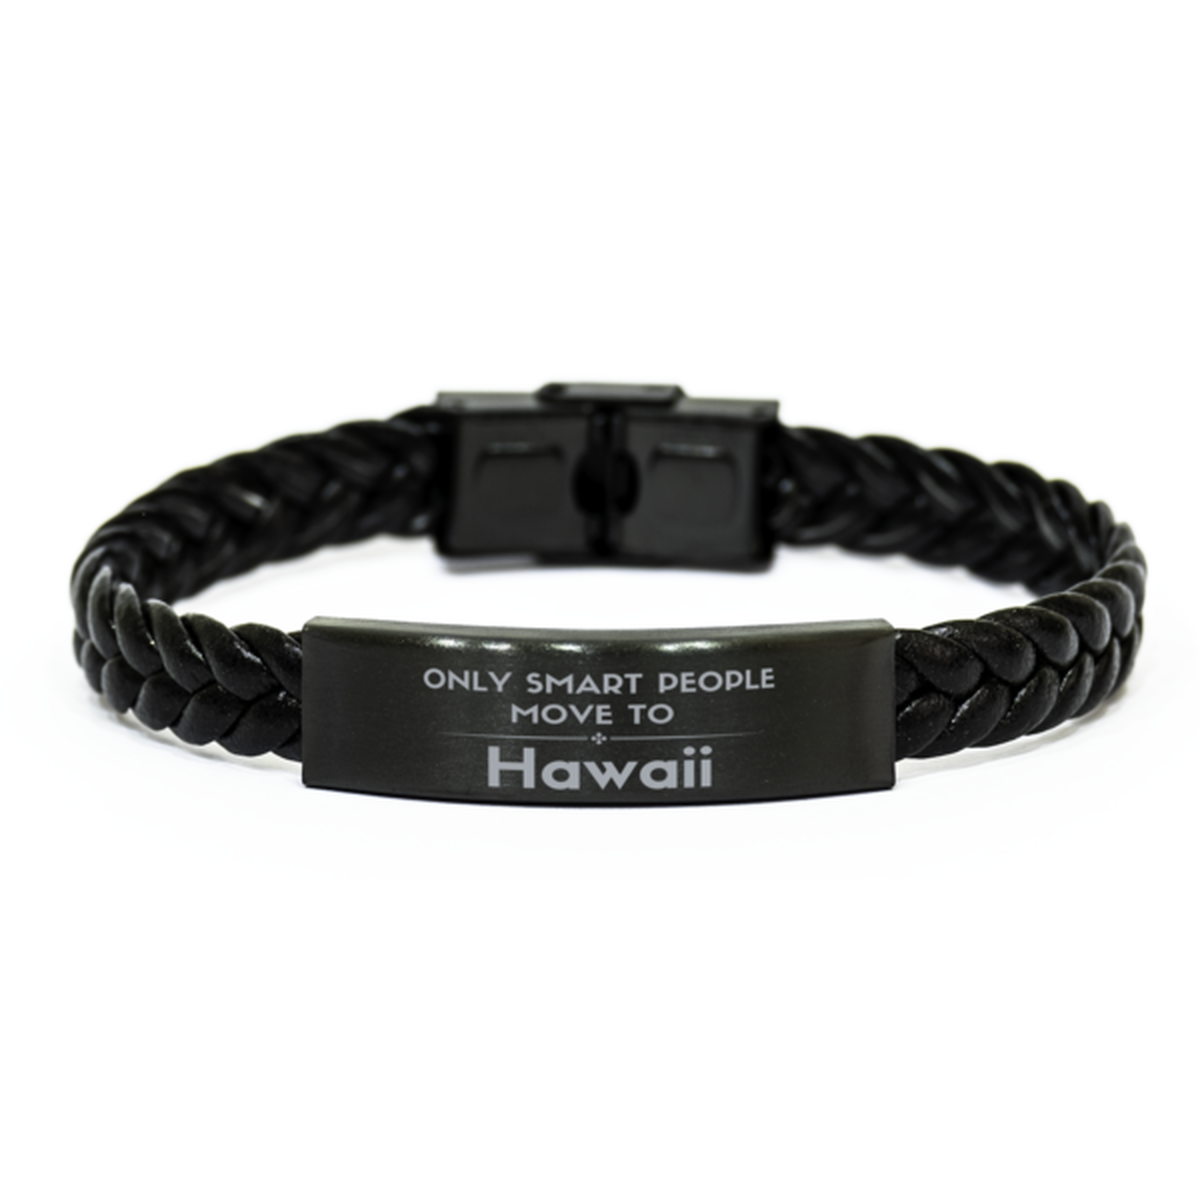 Only smart people move to Hawaii Braided Leather Bracelet, Gag Gifts For Hawaii, Move to Hawaii Gifts for Friends Coworker Funny Saying Quote